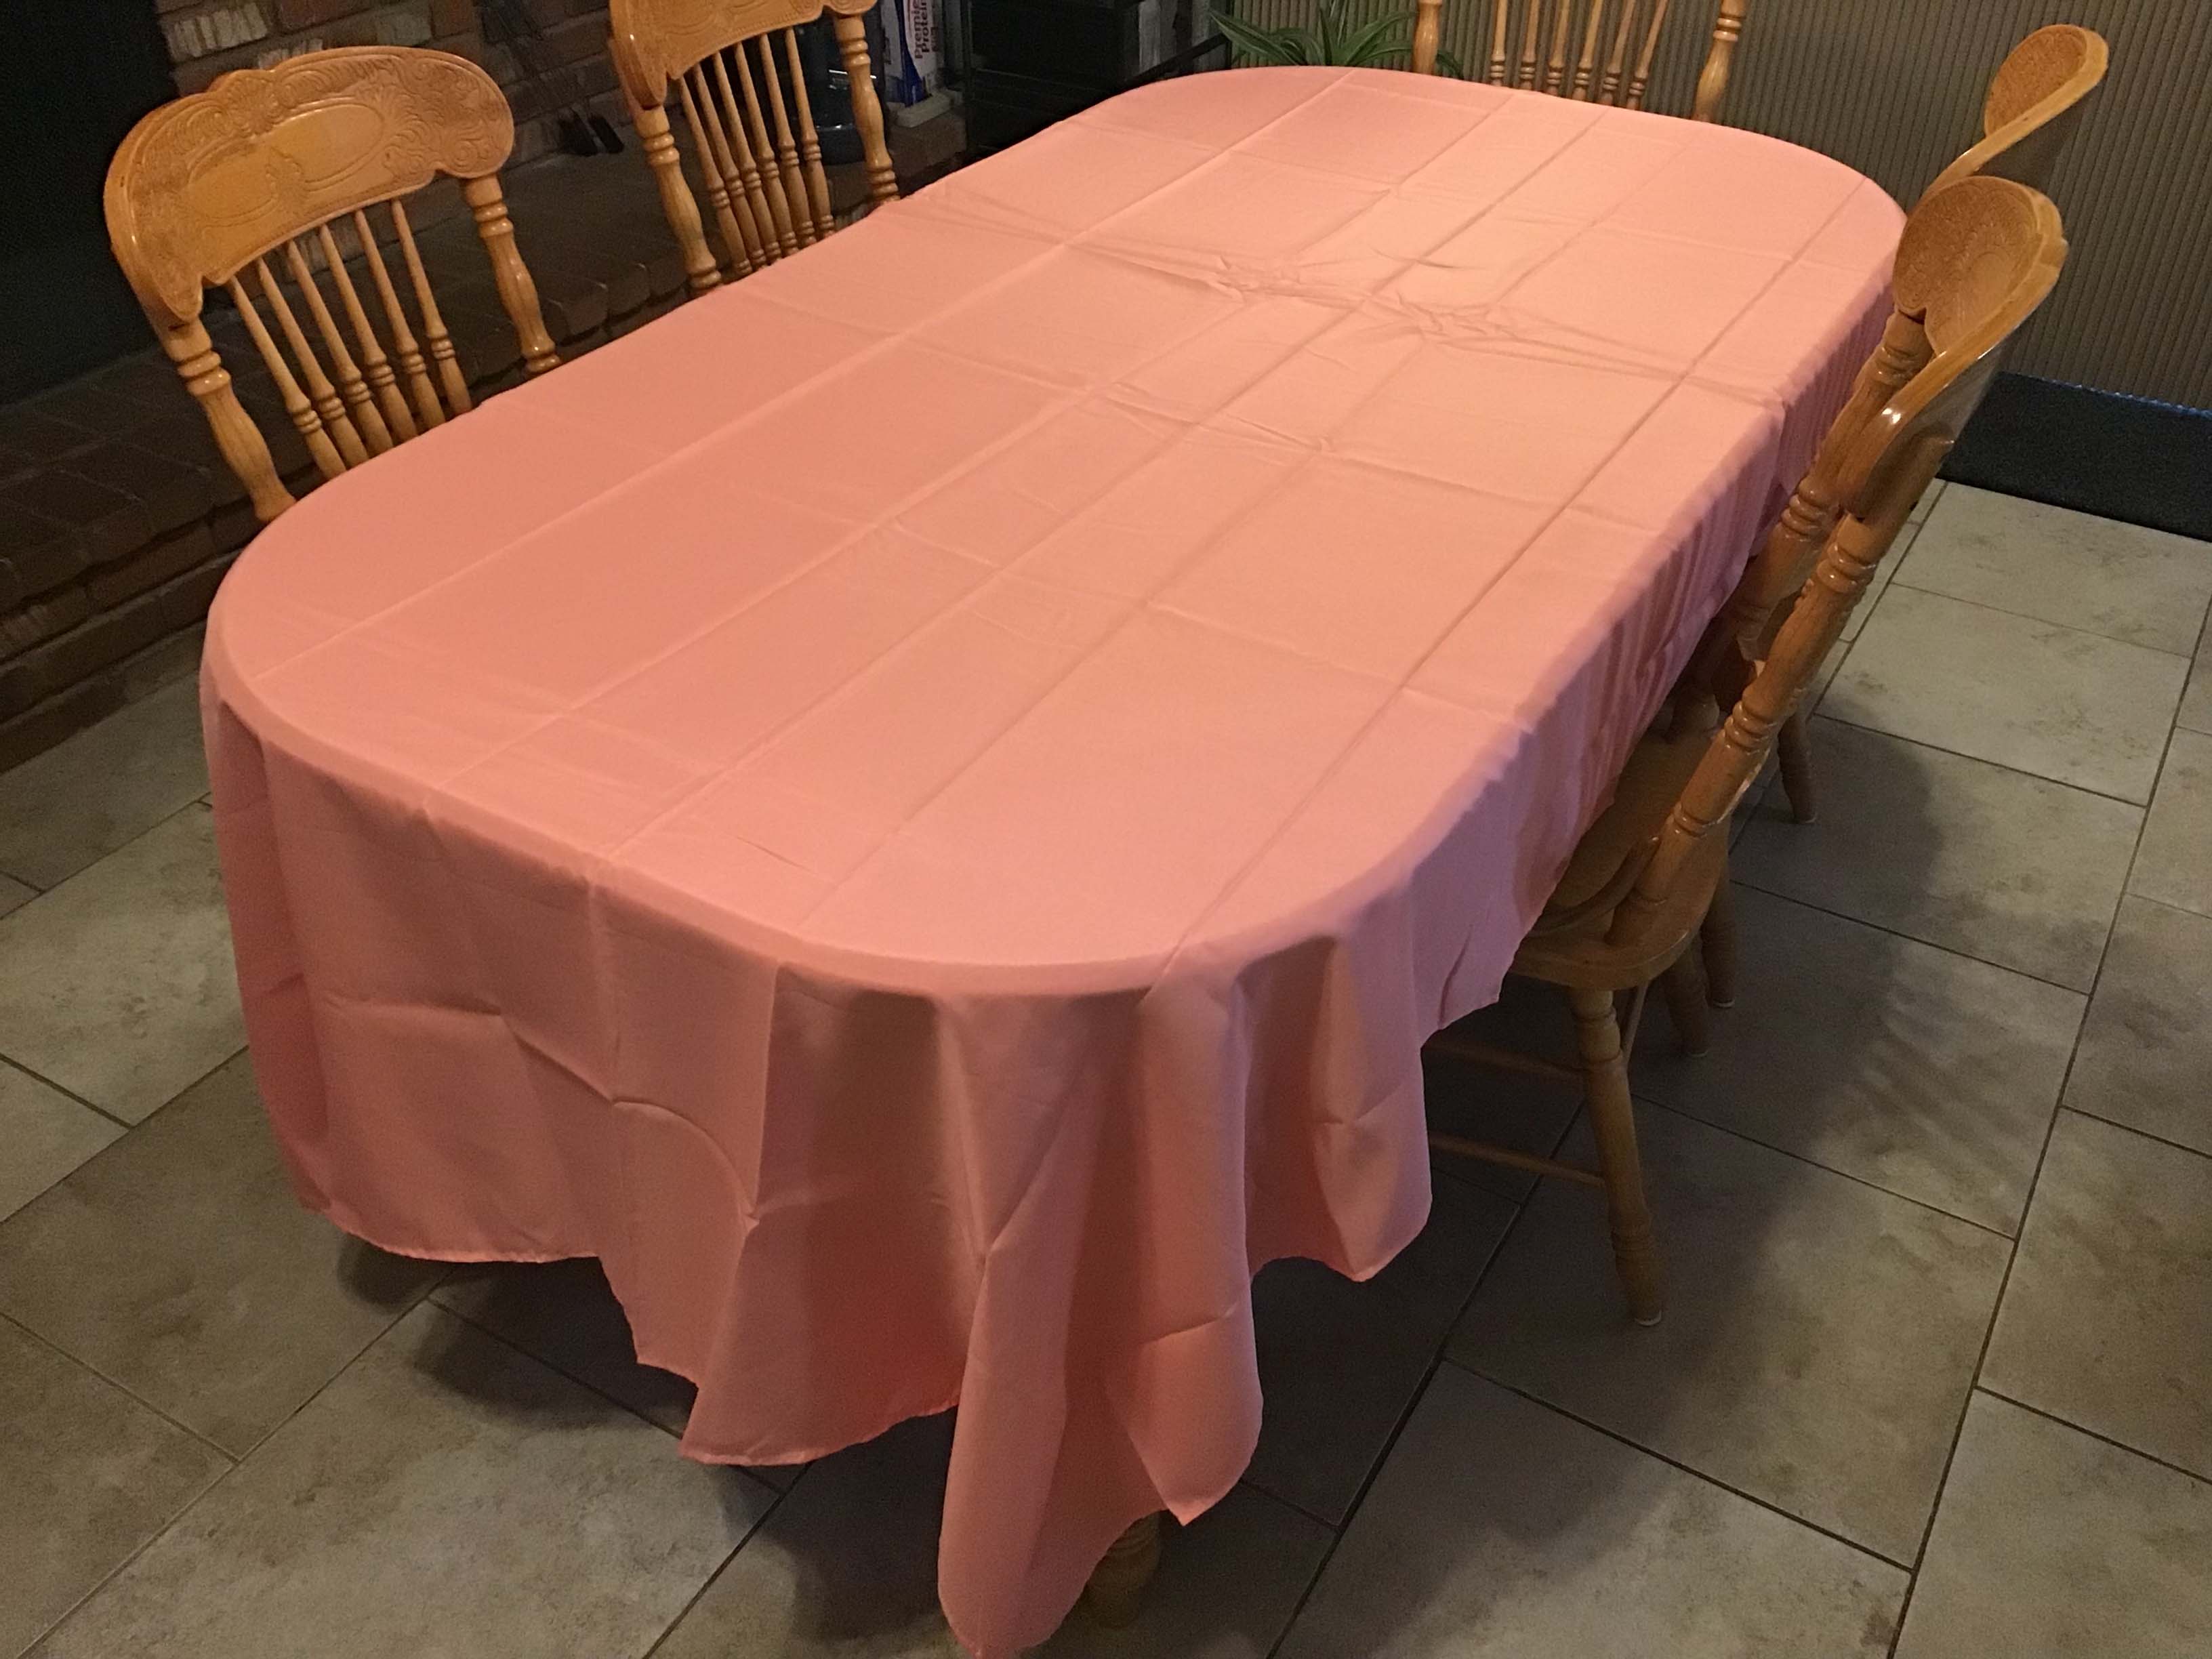 rectangle tablecloths (coral) - 60 x 126